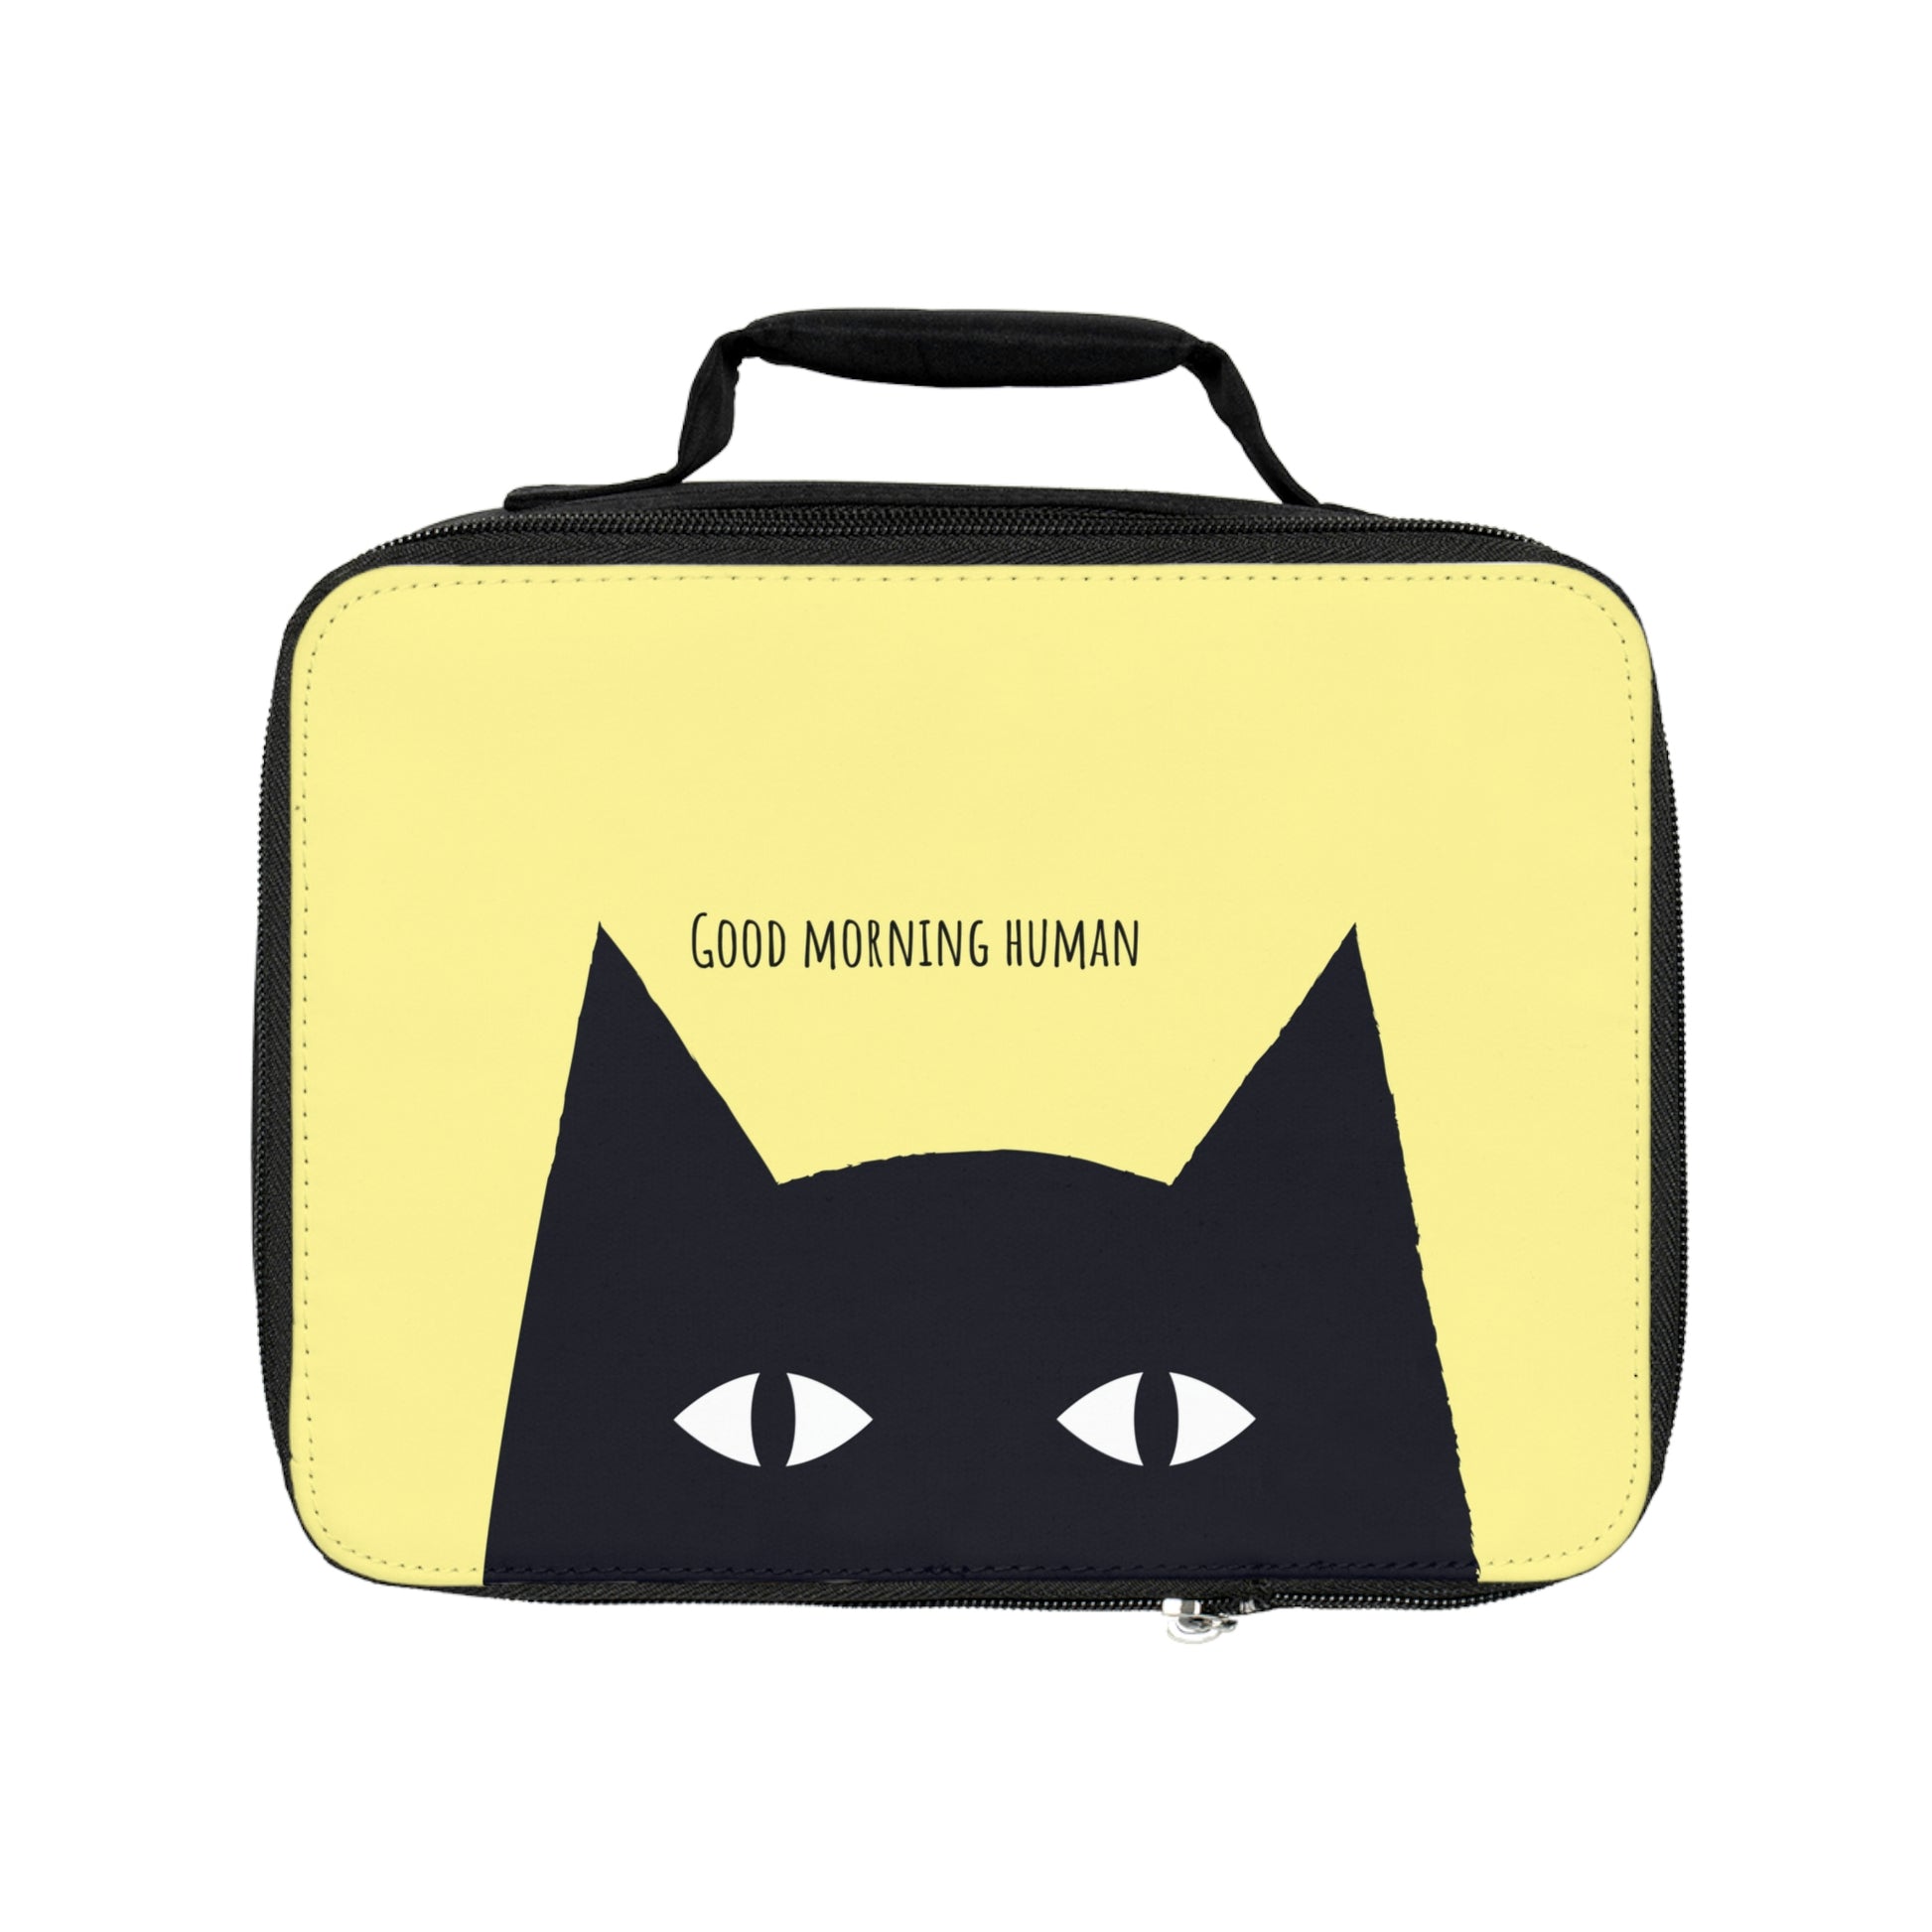 Cute kawaii cat lunch bag, Black Cat says Good Morning Human yellow Lunch Bag, funny cat lunch tote, back to school, cat lovers gift